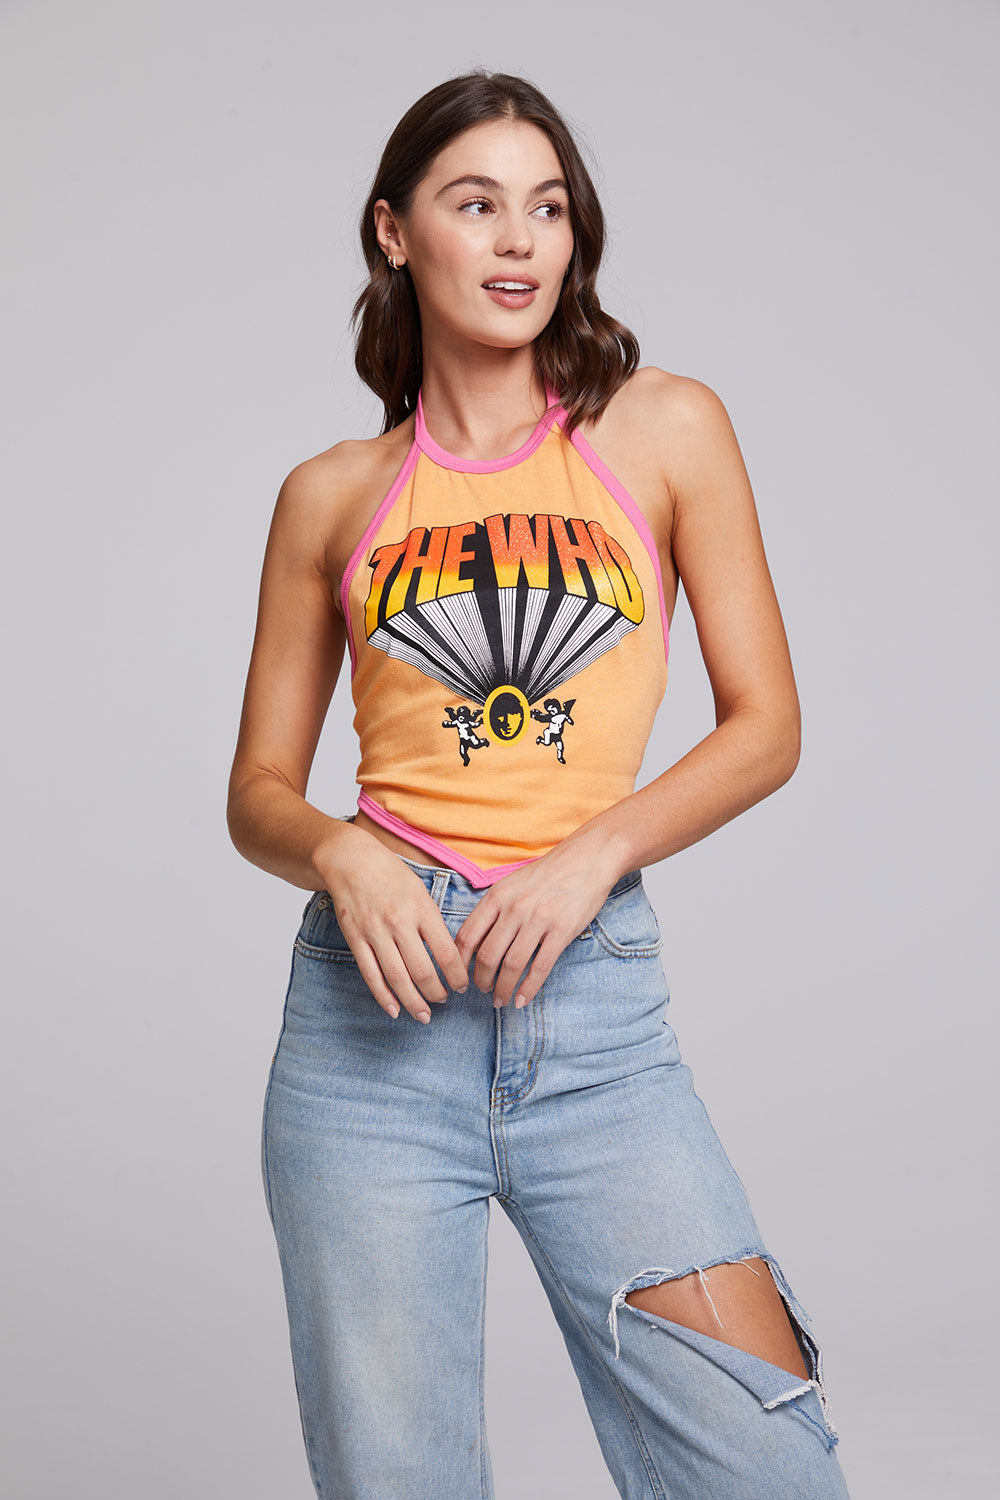 The Who Keith Moon Wallflower Halter Top WOMENS chaserbrand